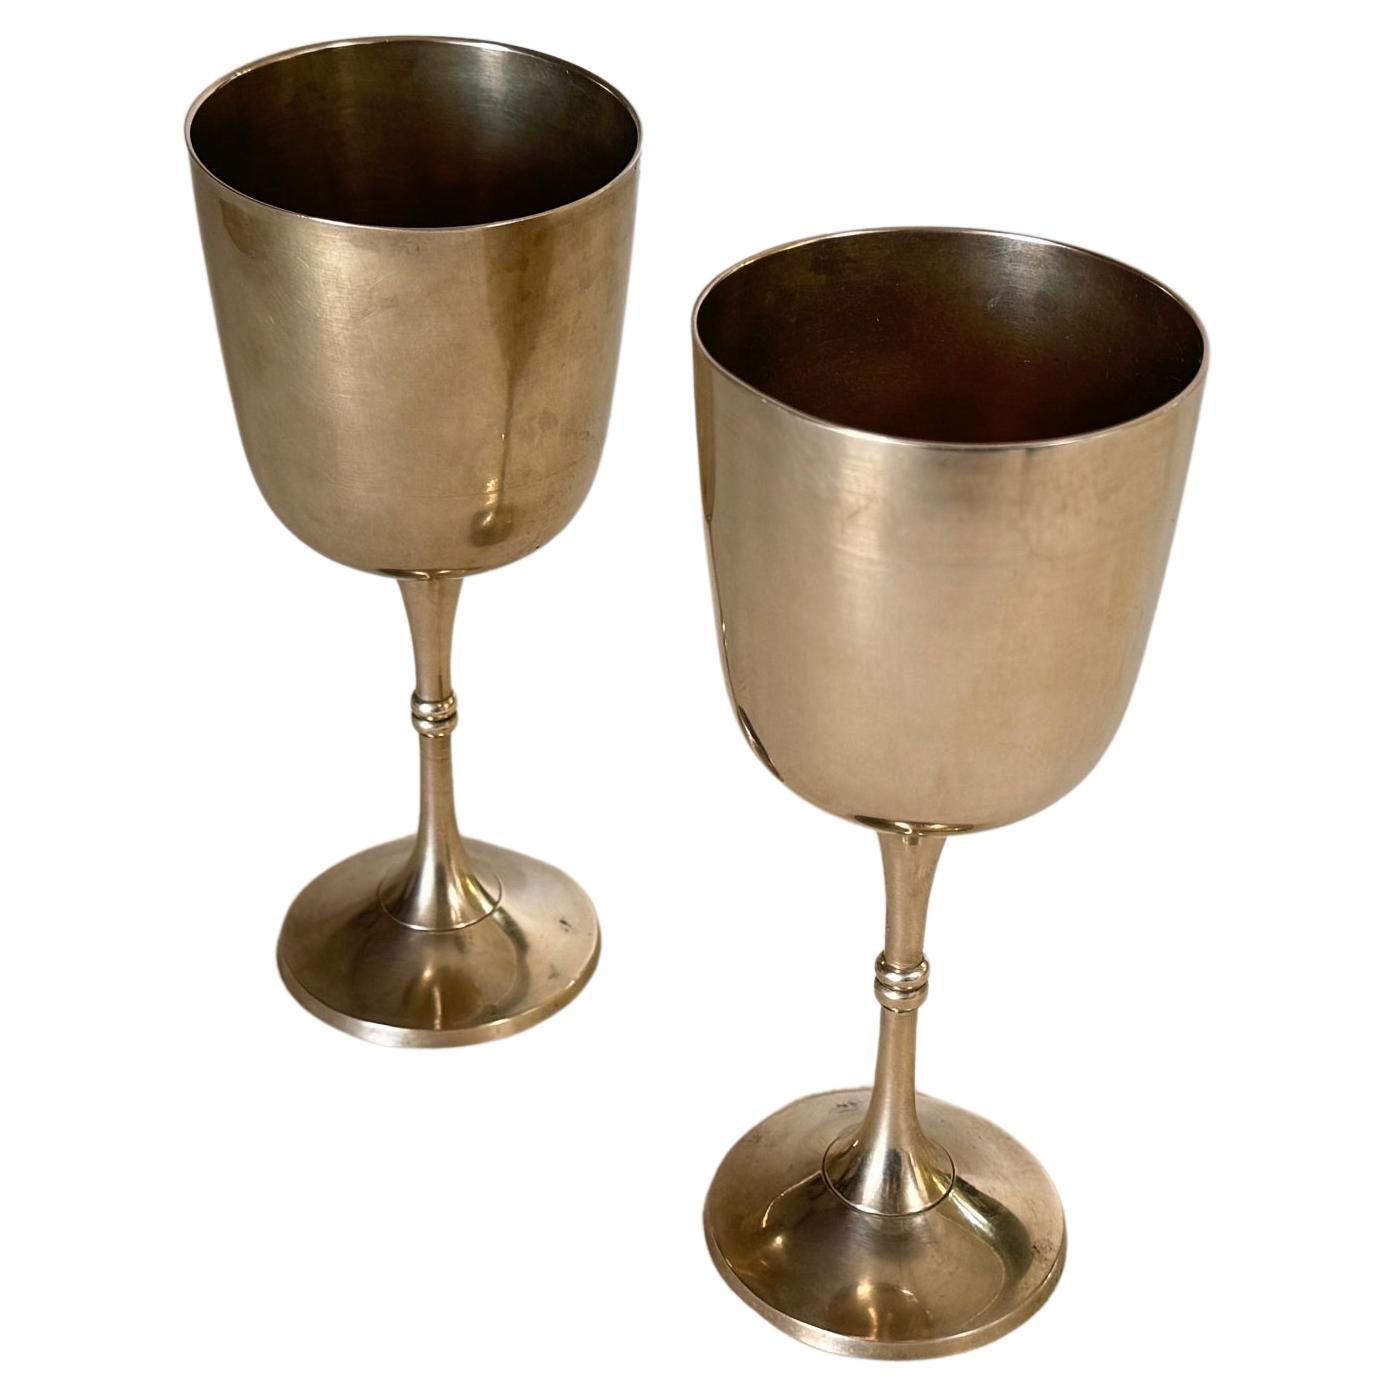 French Yellow Chalices in metal
Silvered Color